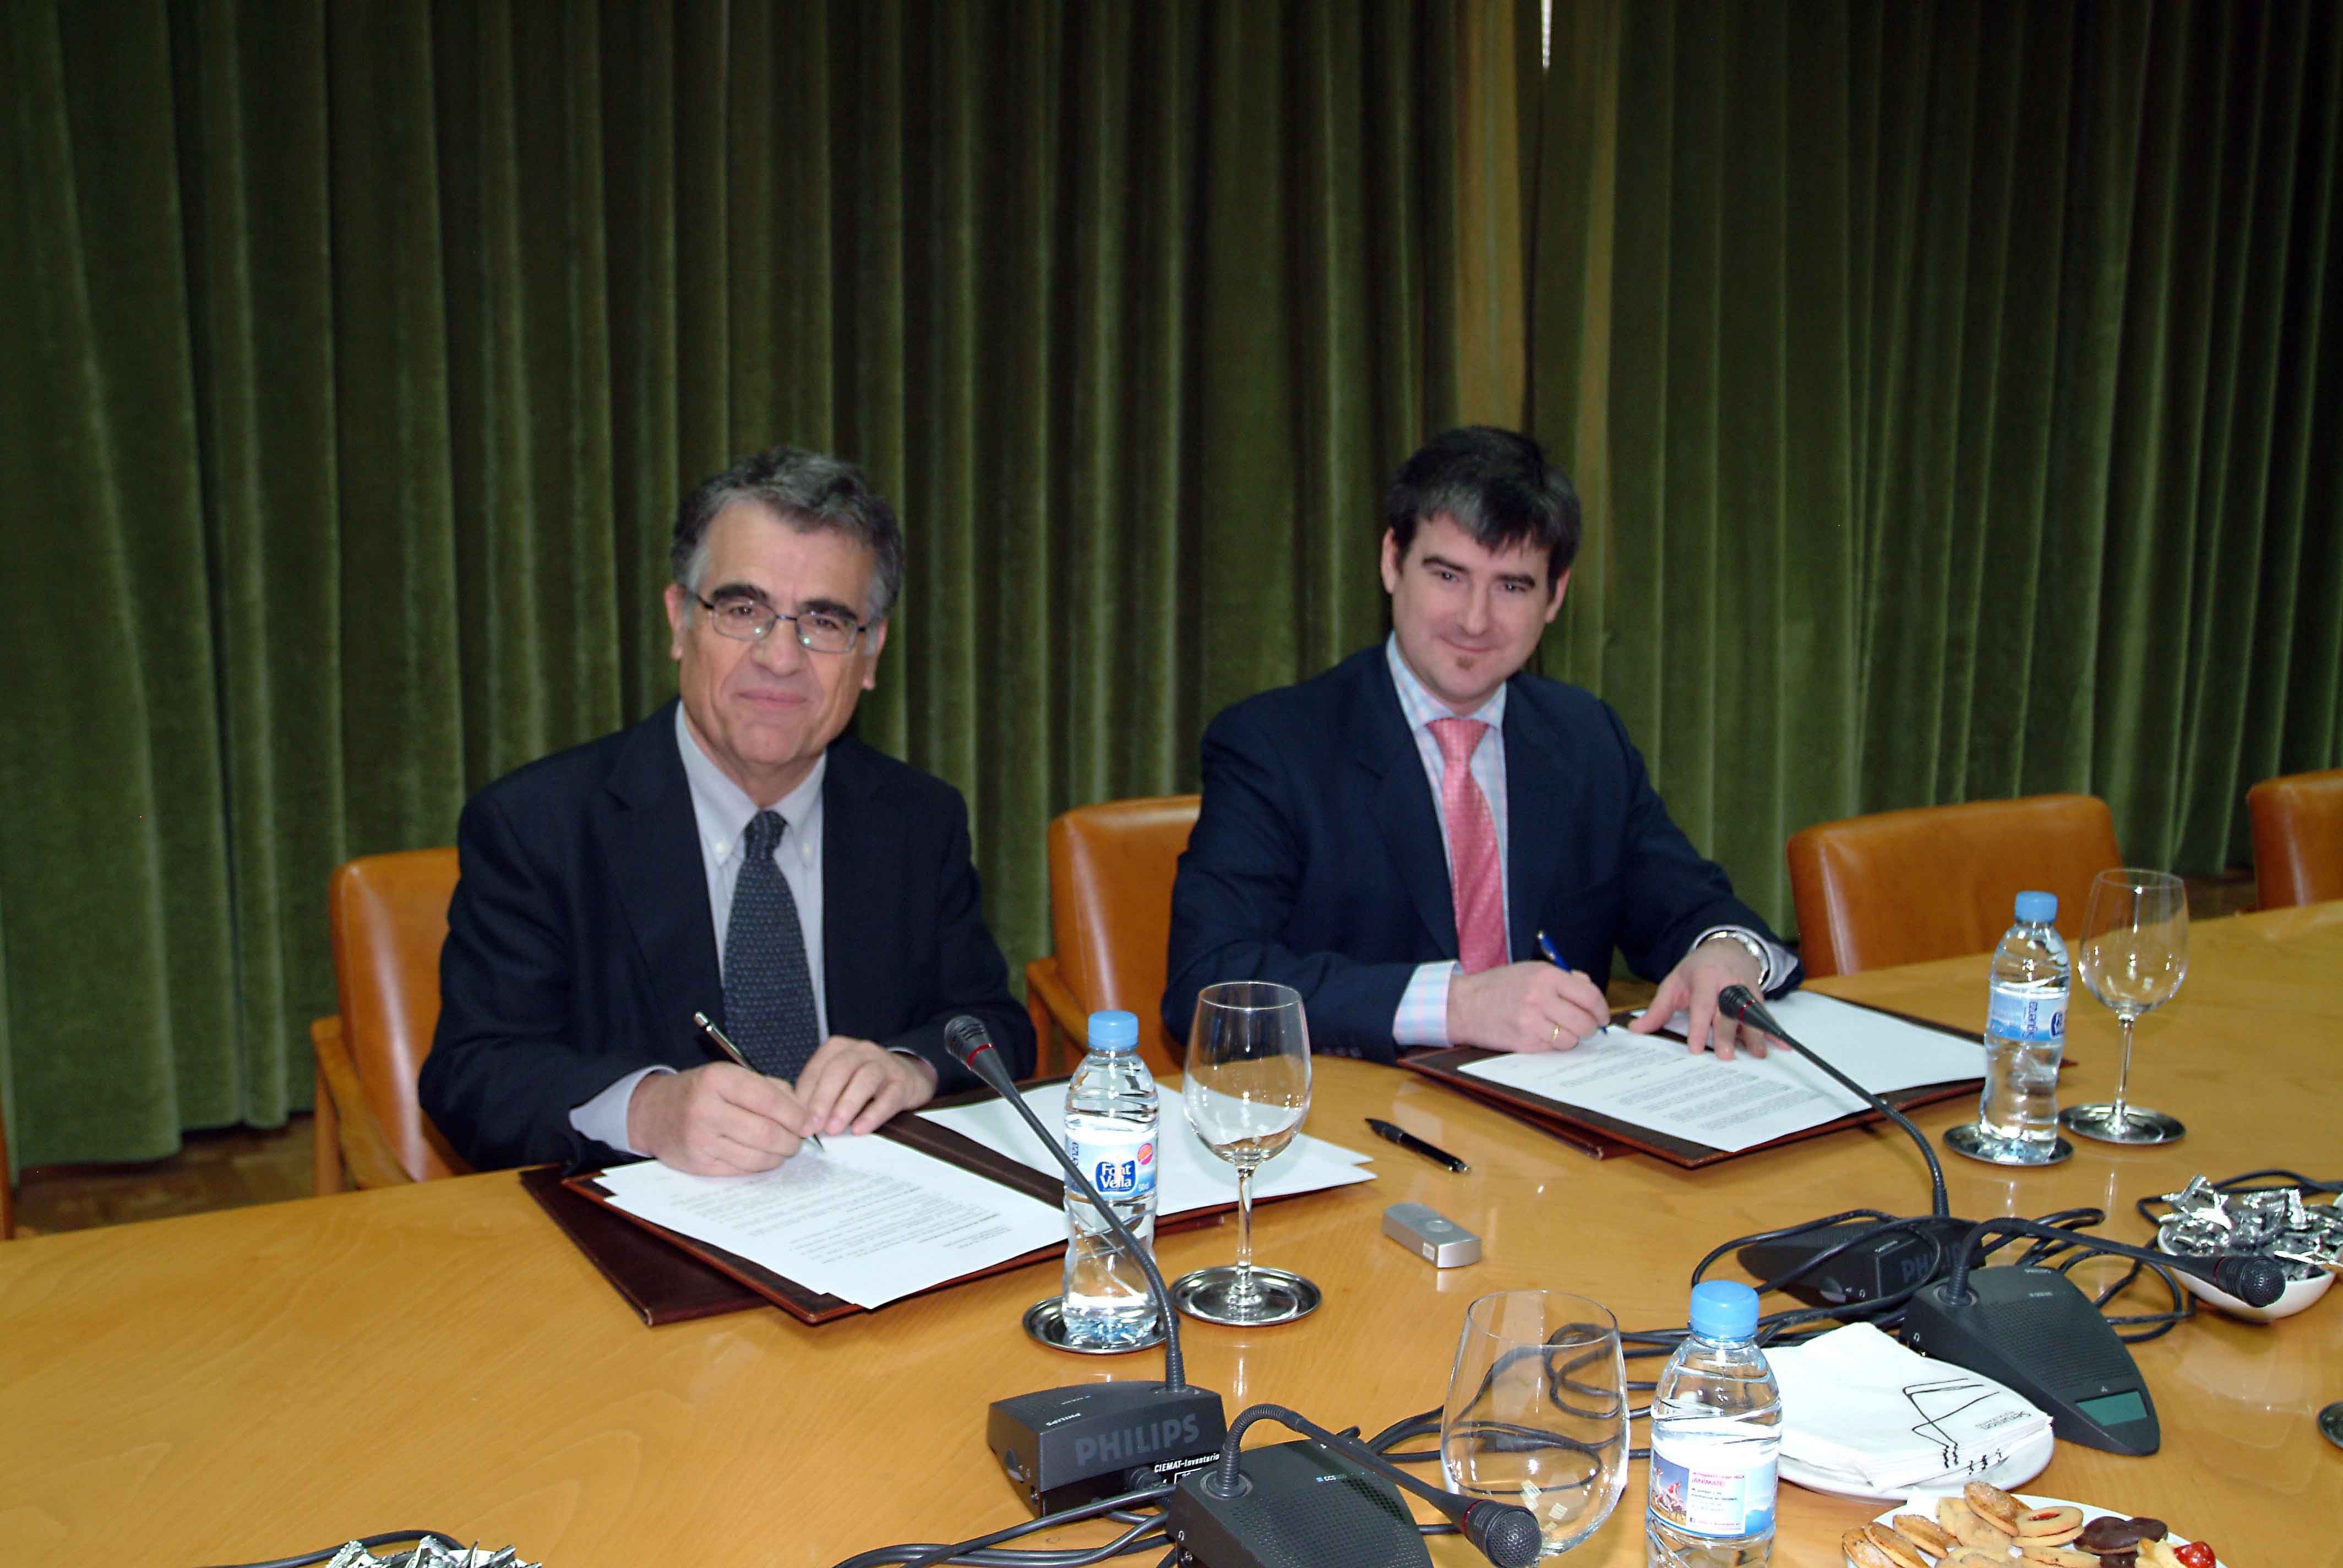 IK4 and CIEMAT sign a collaboration agreement on research into renewable energies